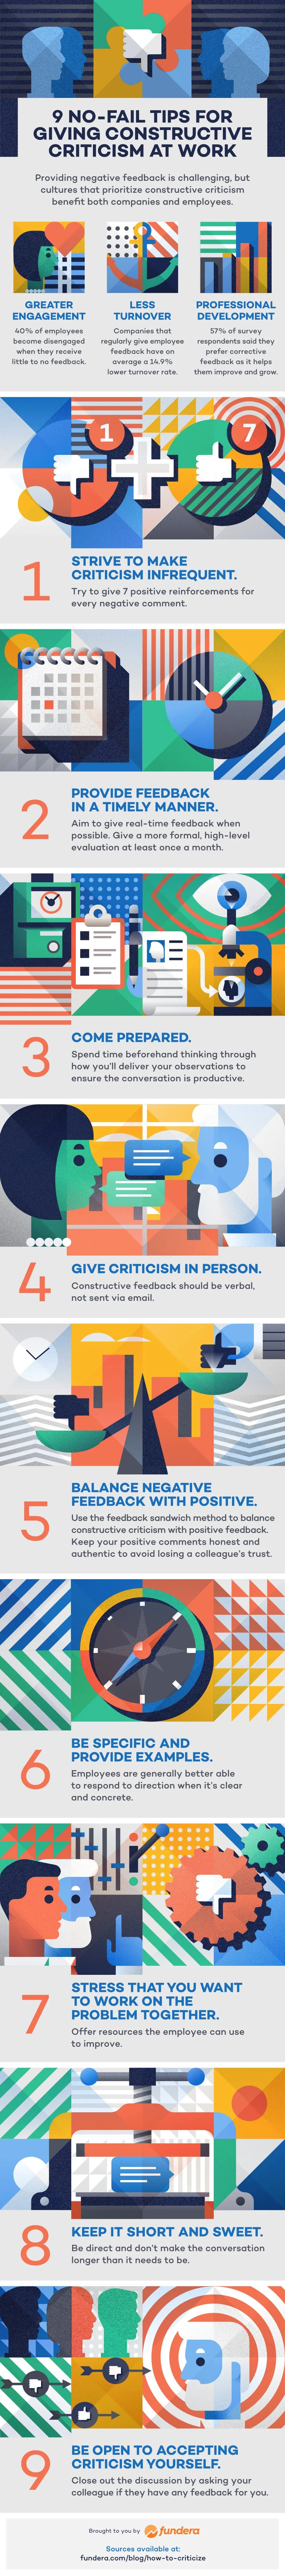 9 No-Fail Tips For Giving Constructive Criticism At Work - Infographic